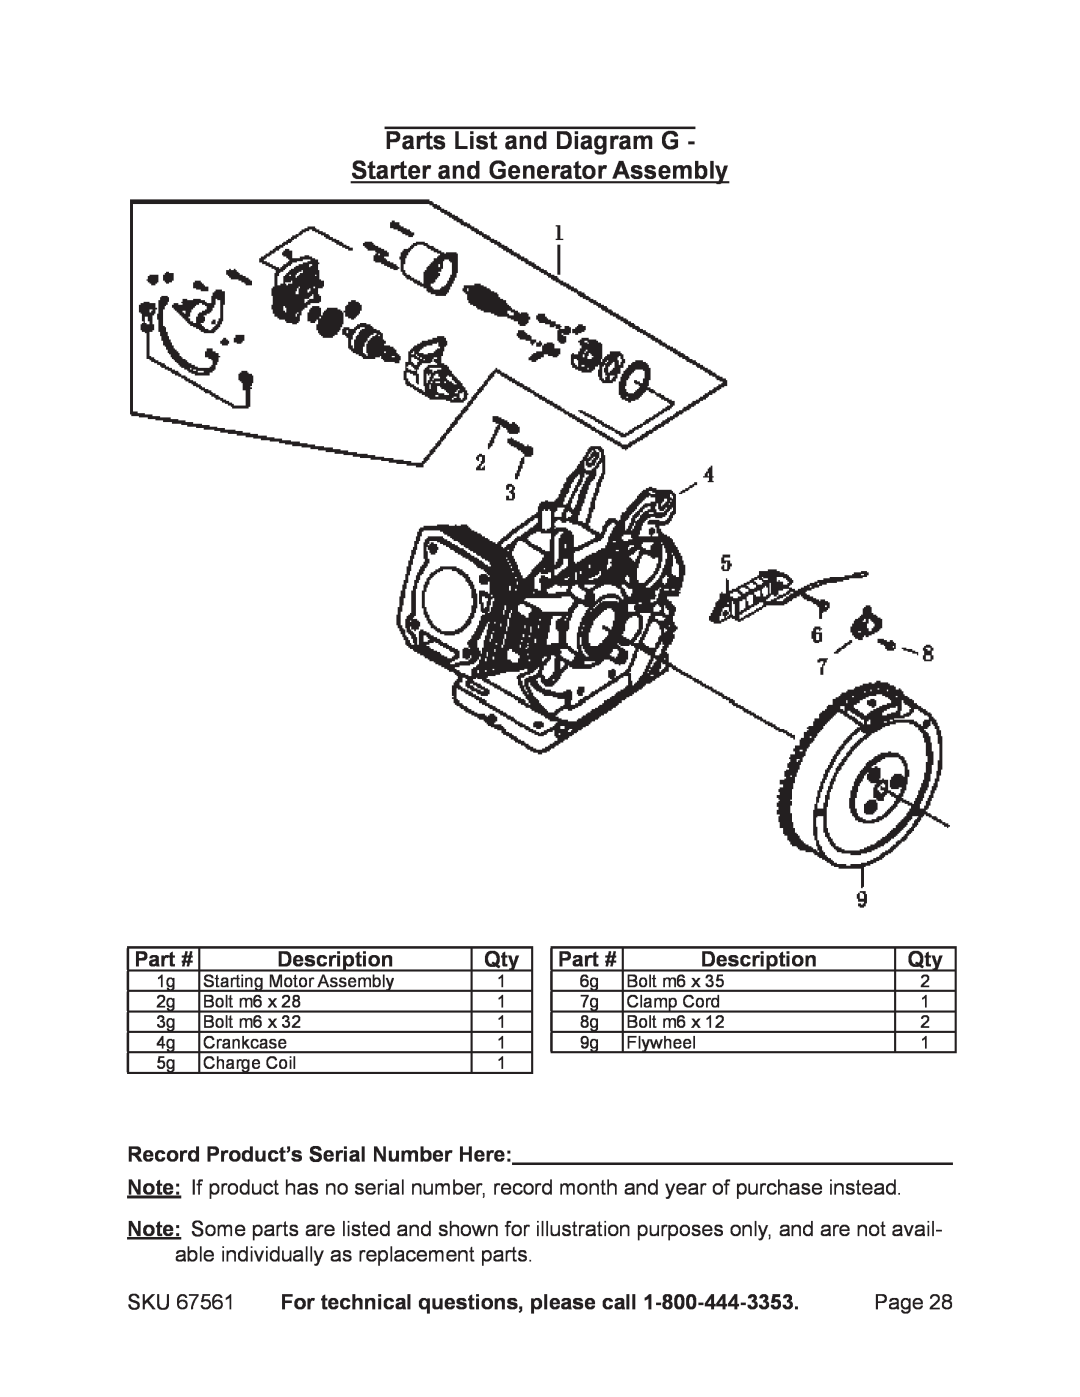 Chicago Electric 67561 manual Parts List and Diagram G Starter and Generator Assembly, Description 